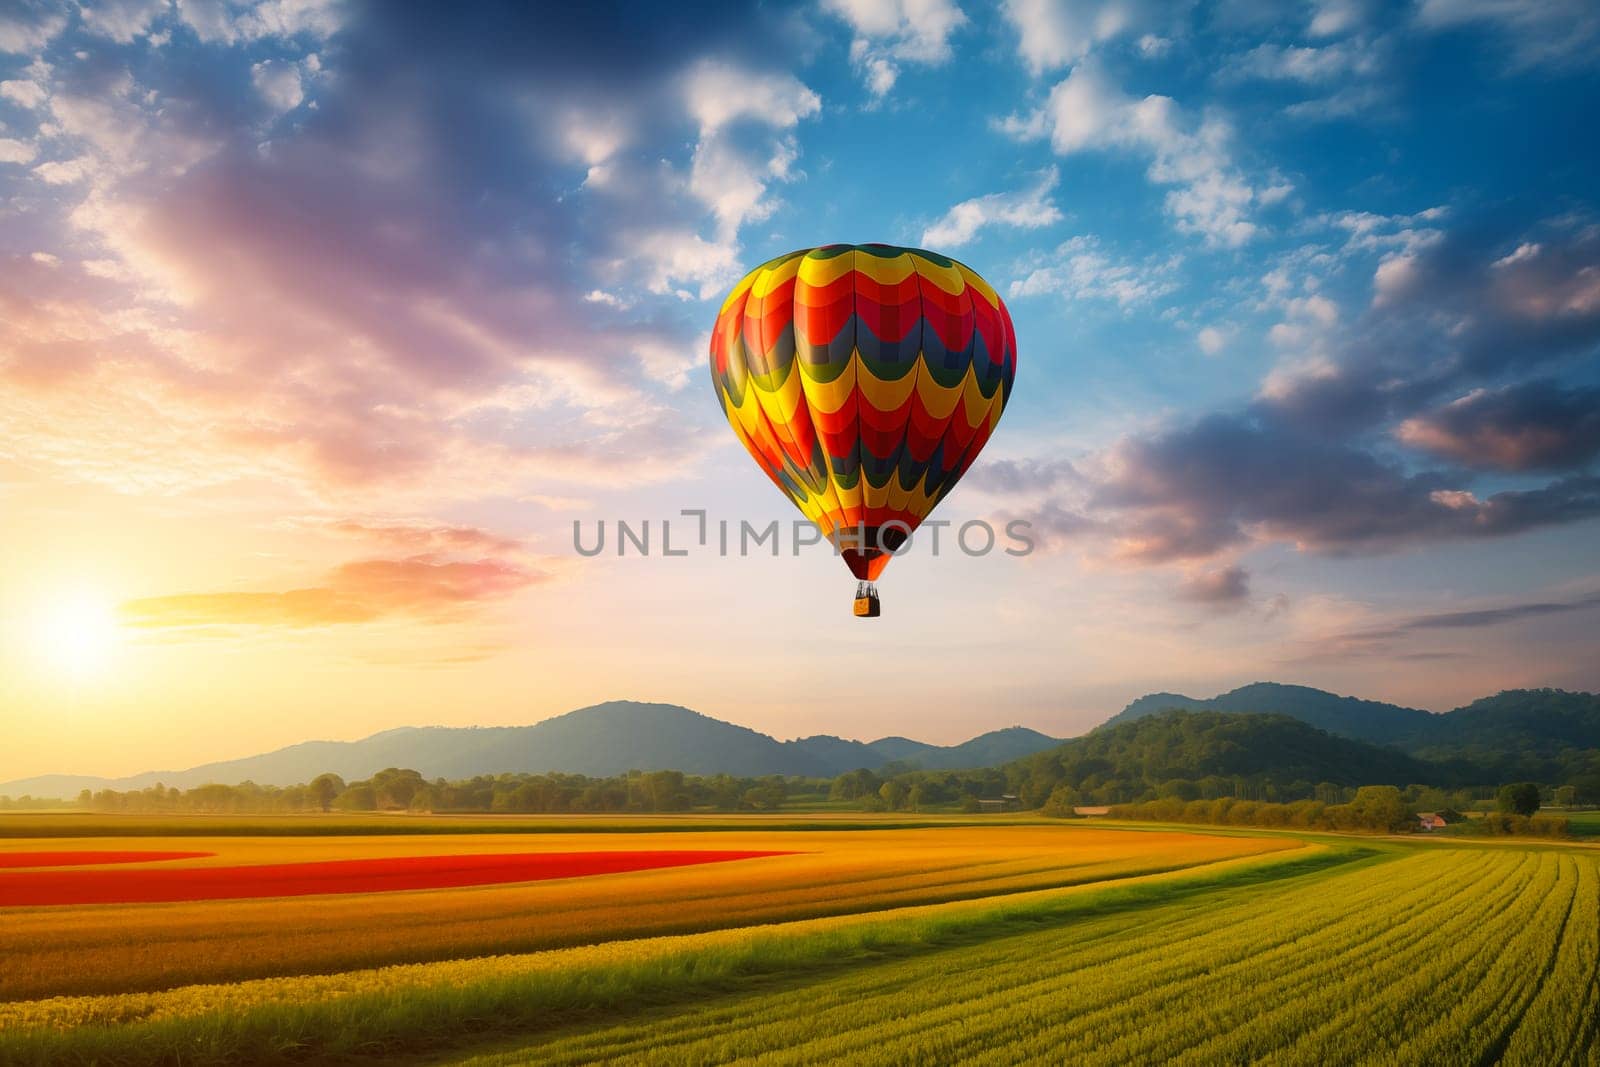 Colorful hot air balloon over blooming field meadow at sunset by dimol